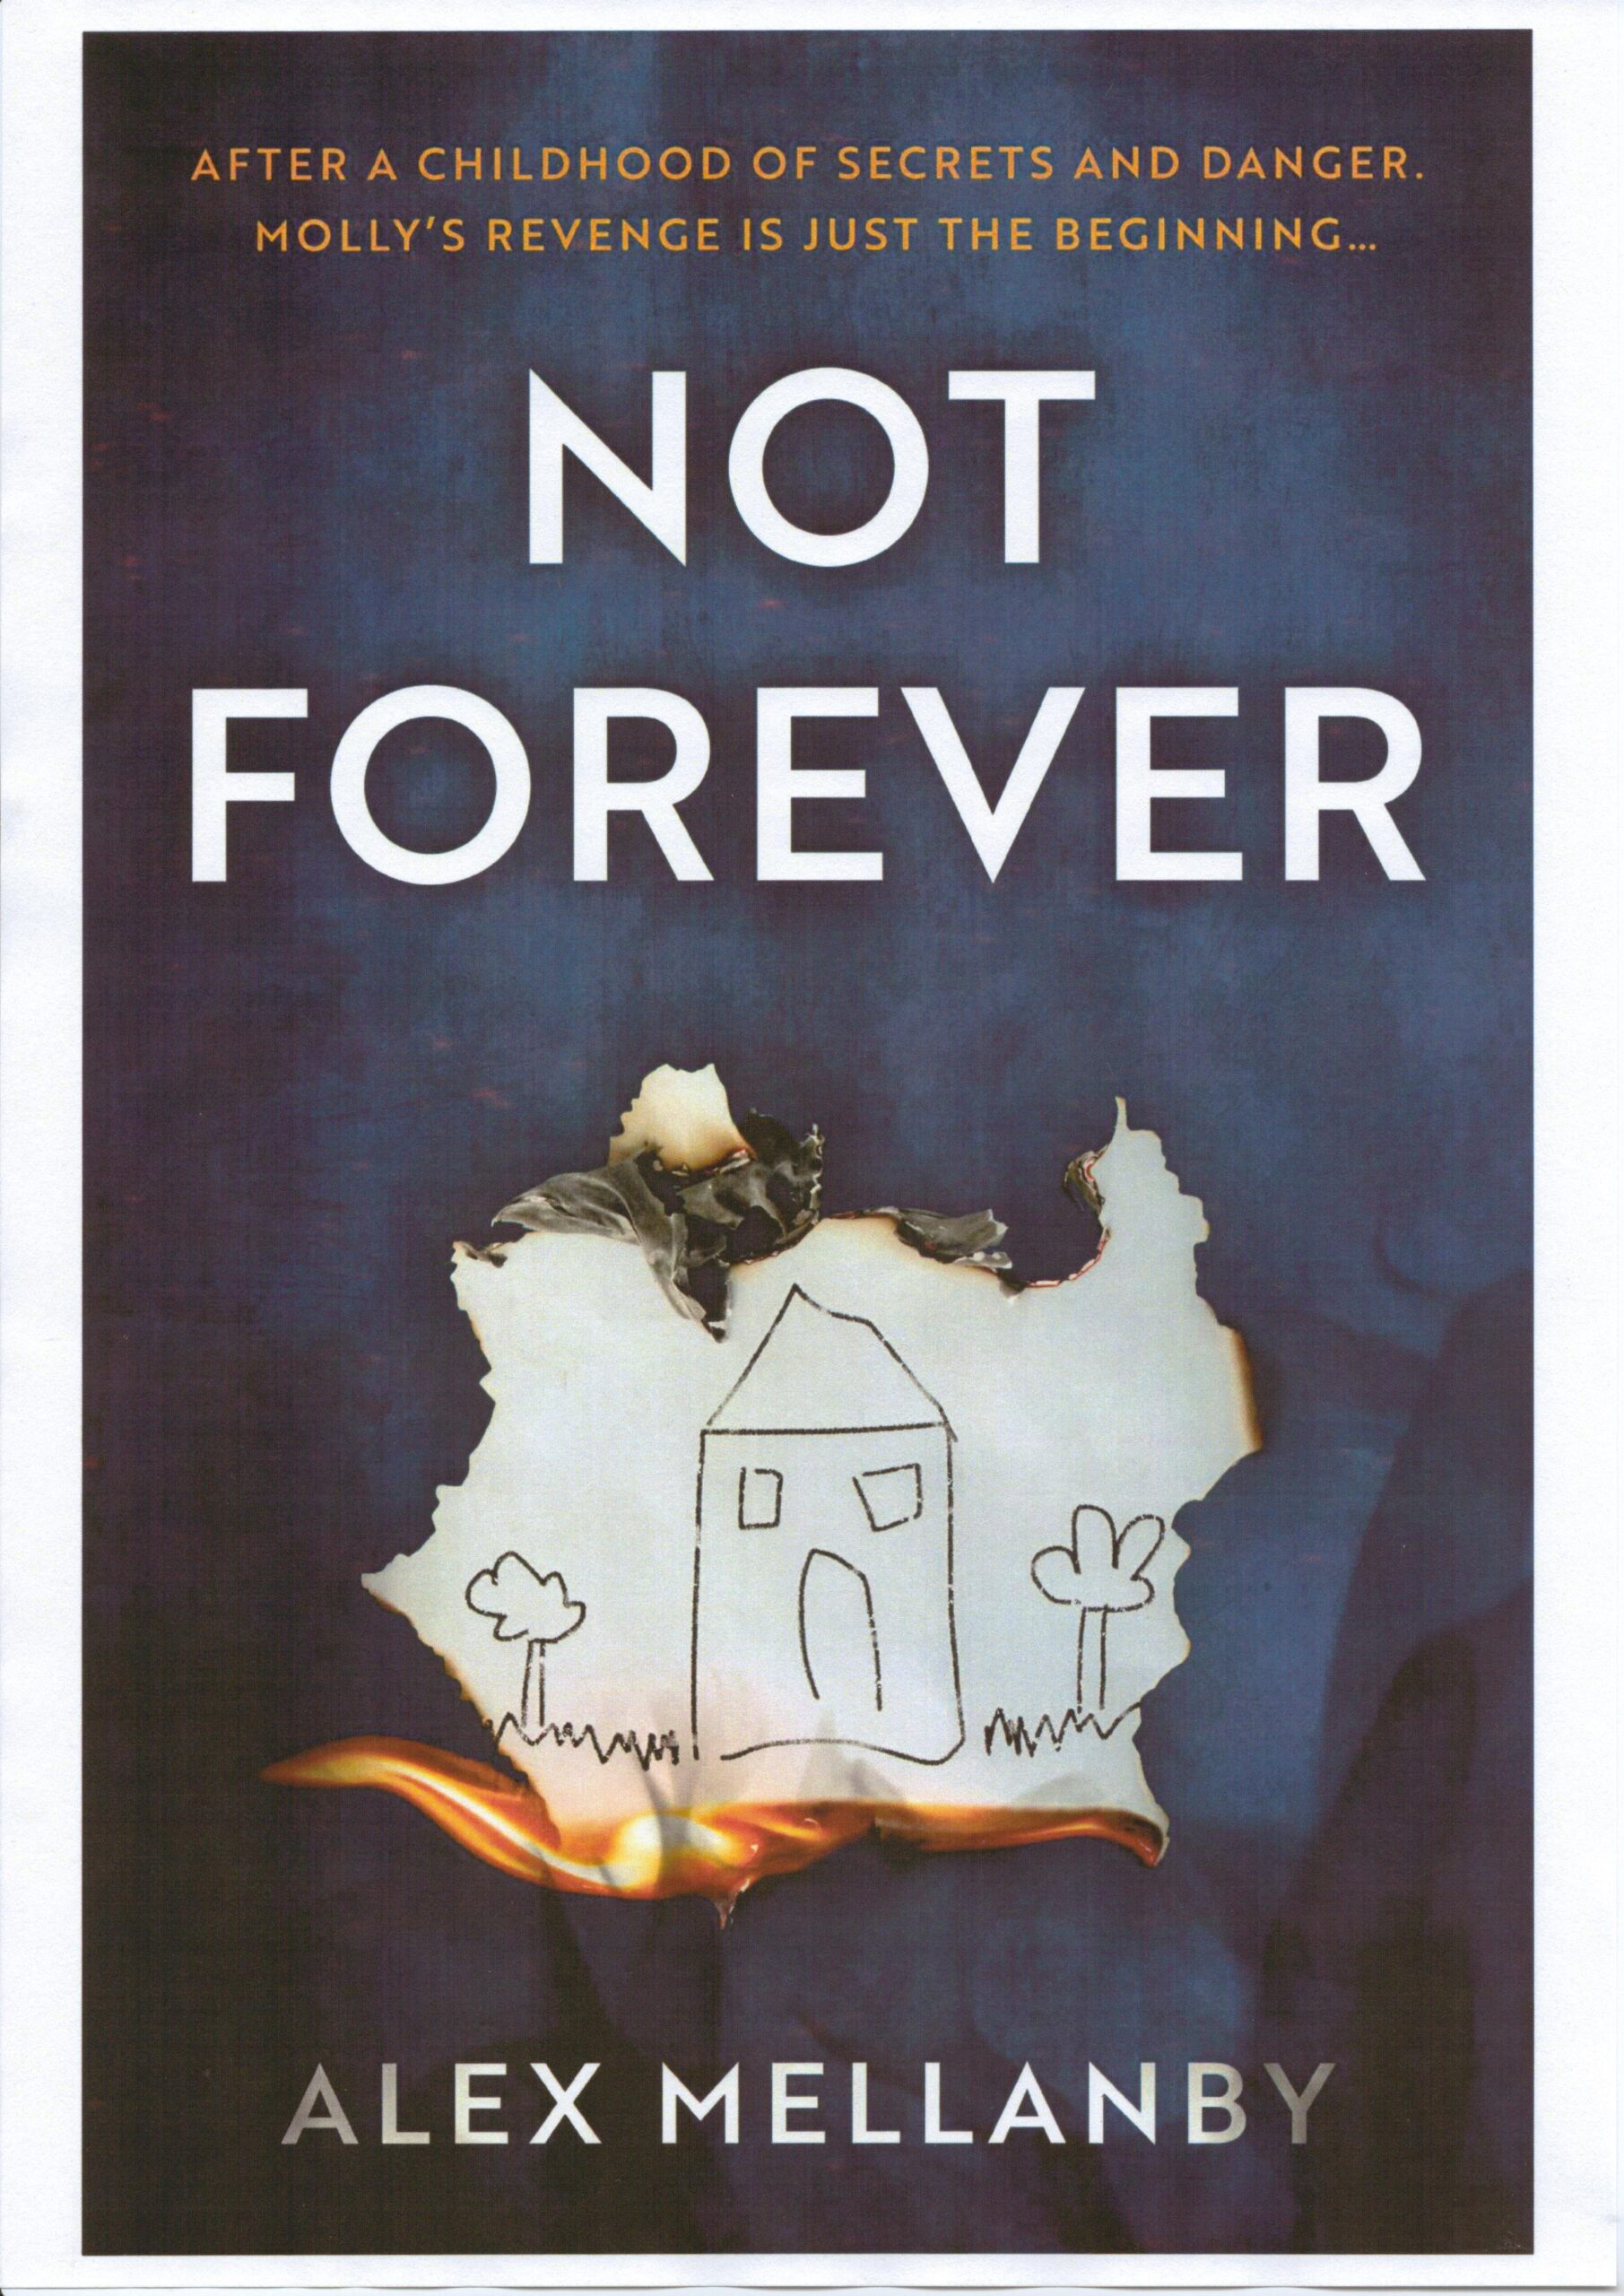 Not Forever by Alex Mellanby